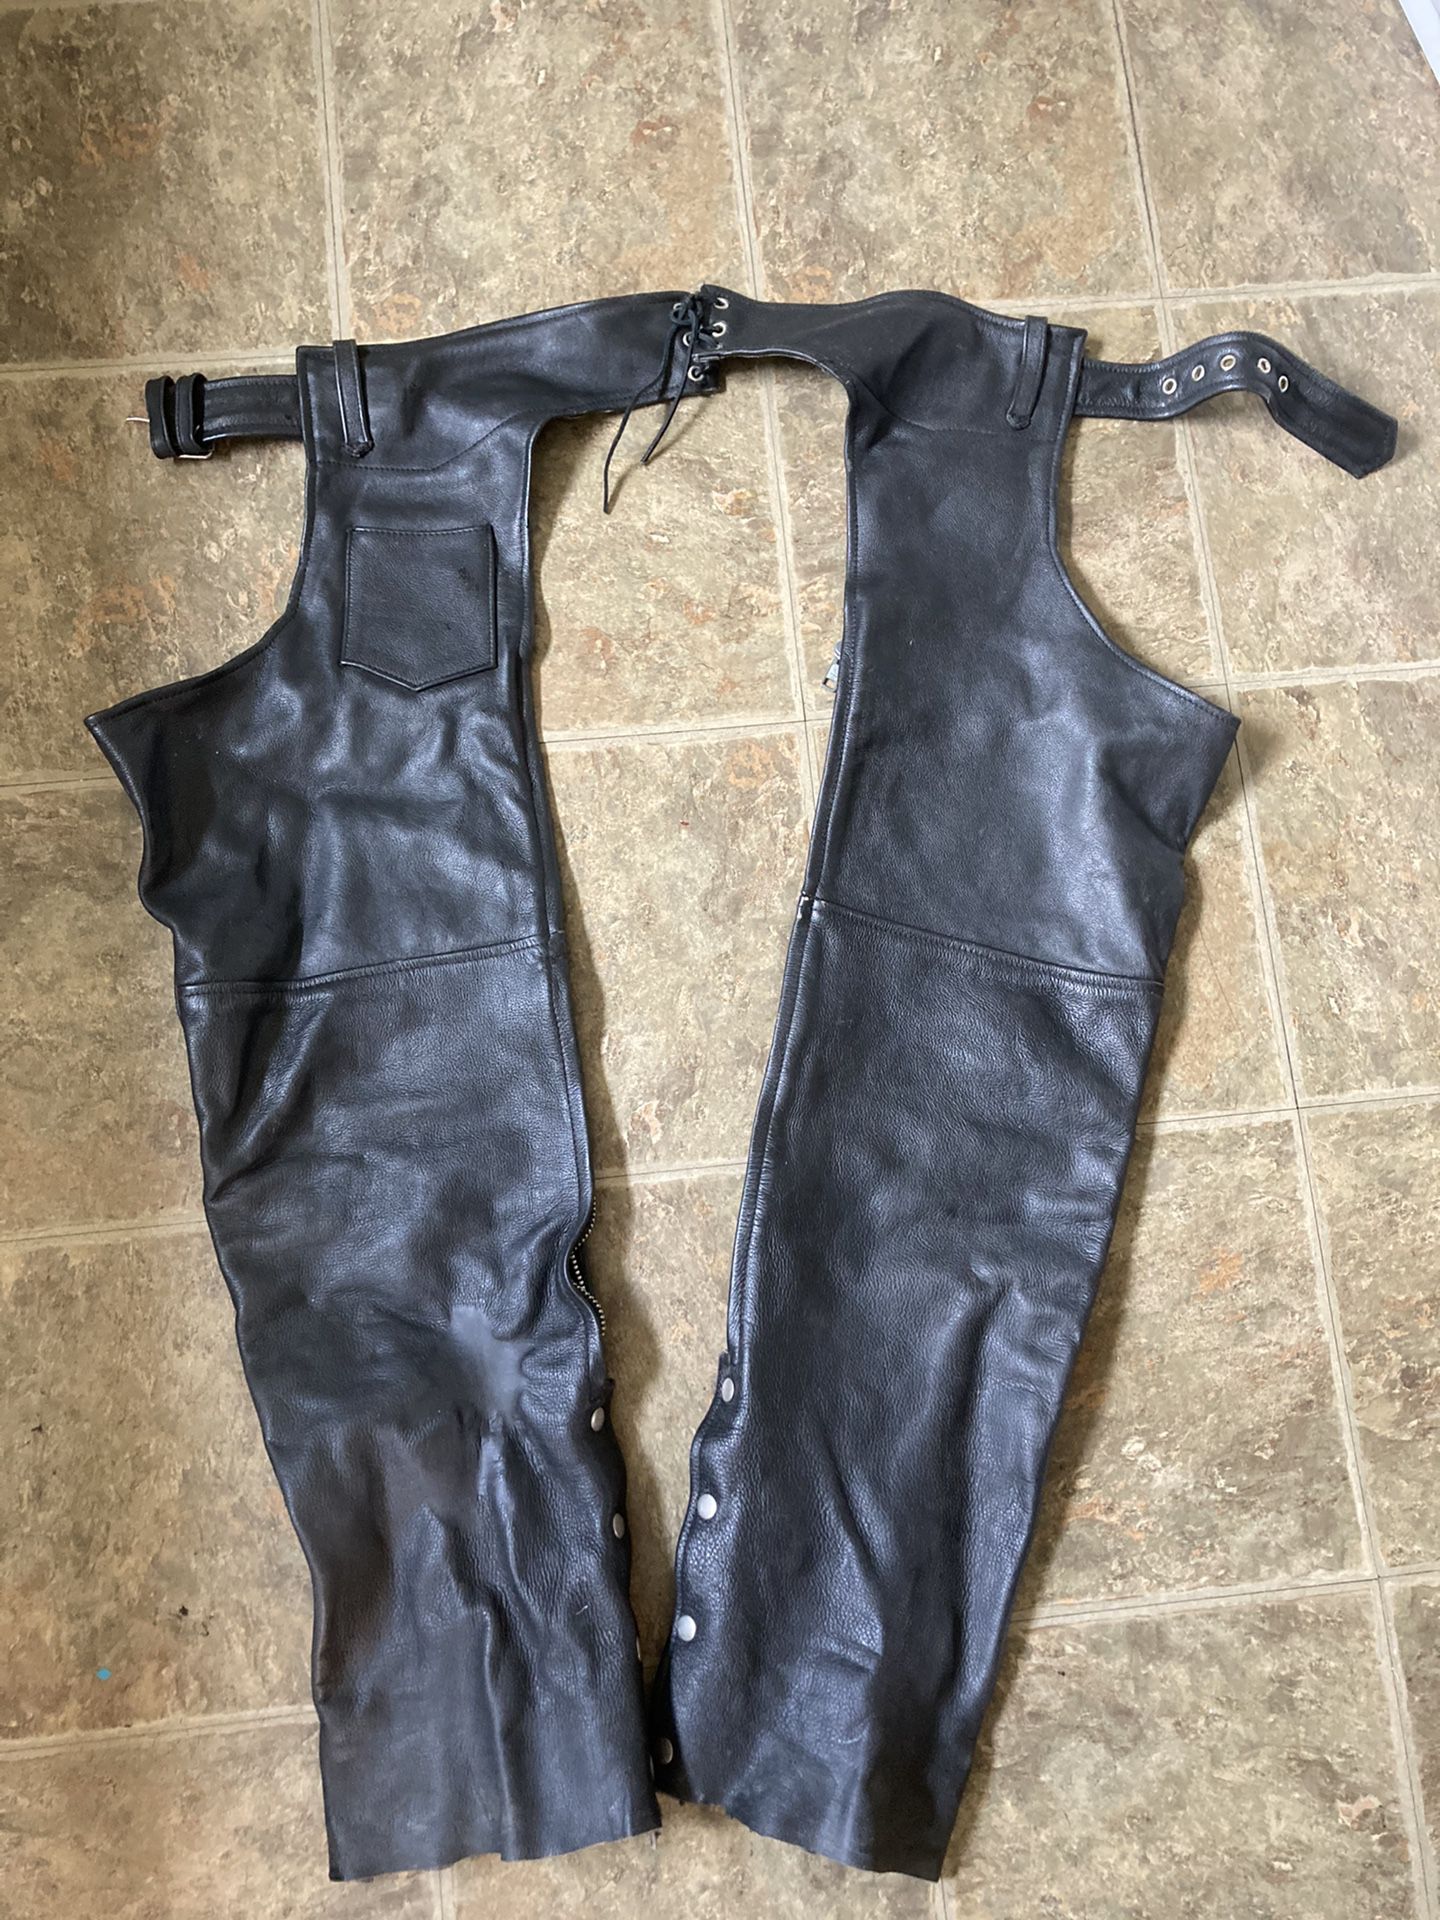 Leather chaps In Great Shape